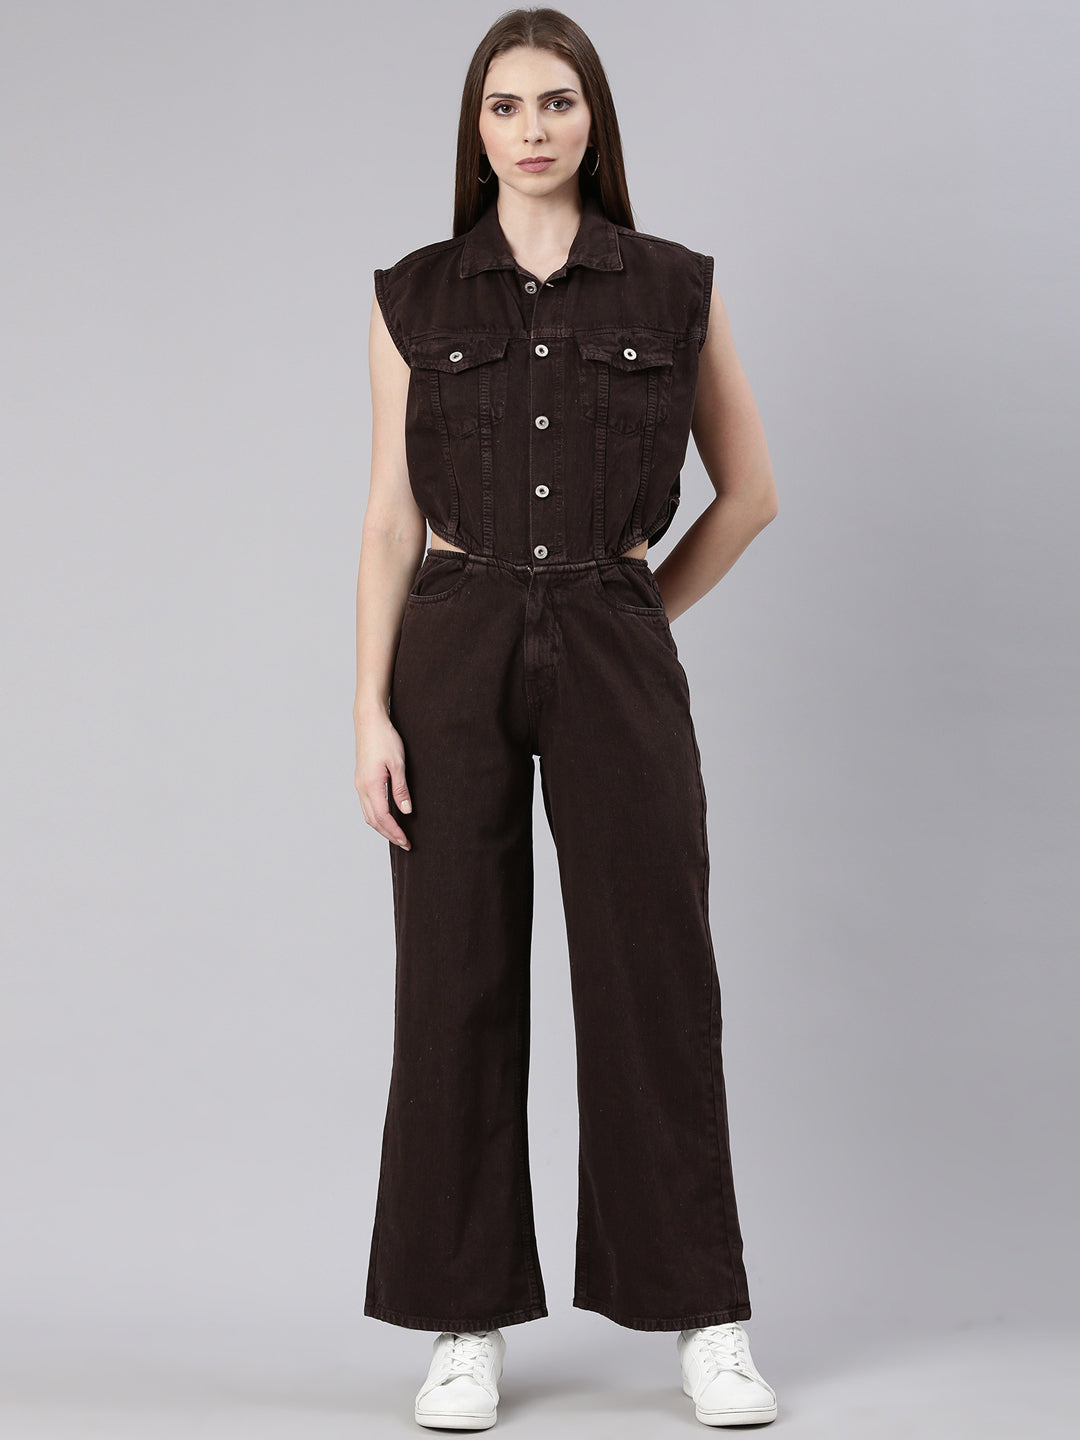 Women Solid Coffee Brown Basic Jumpsuit